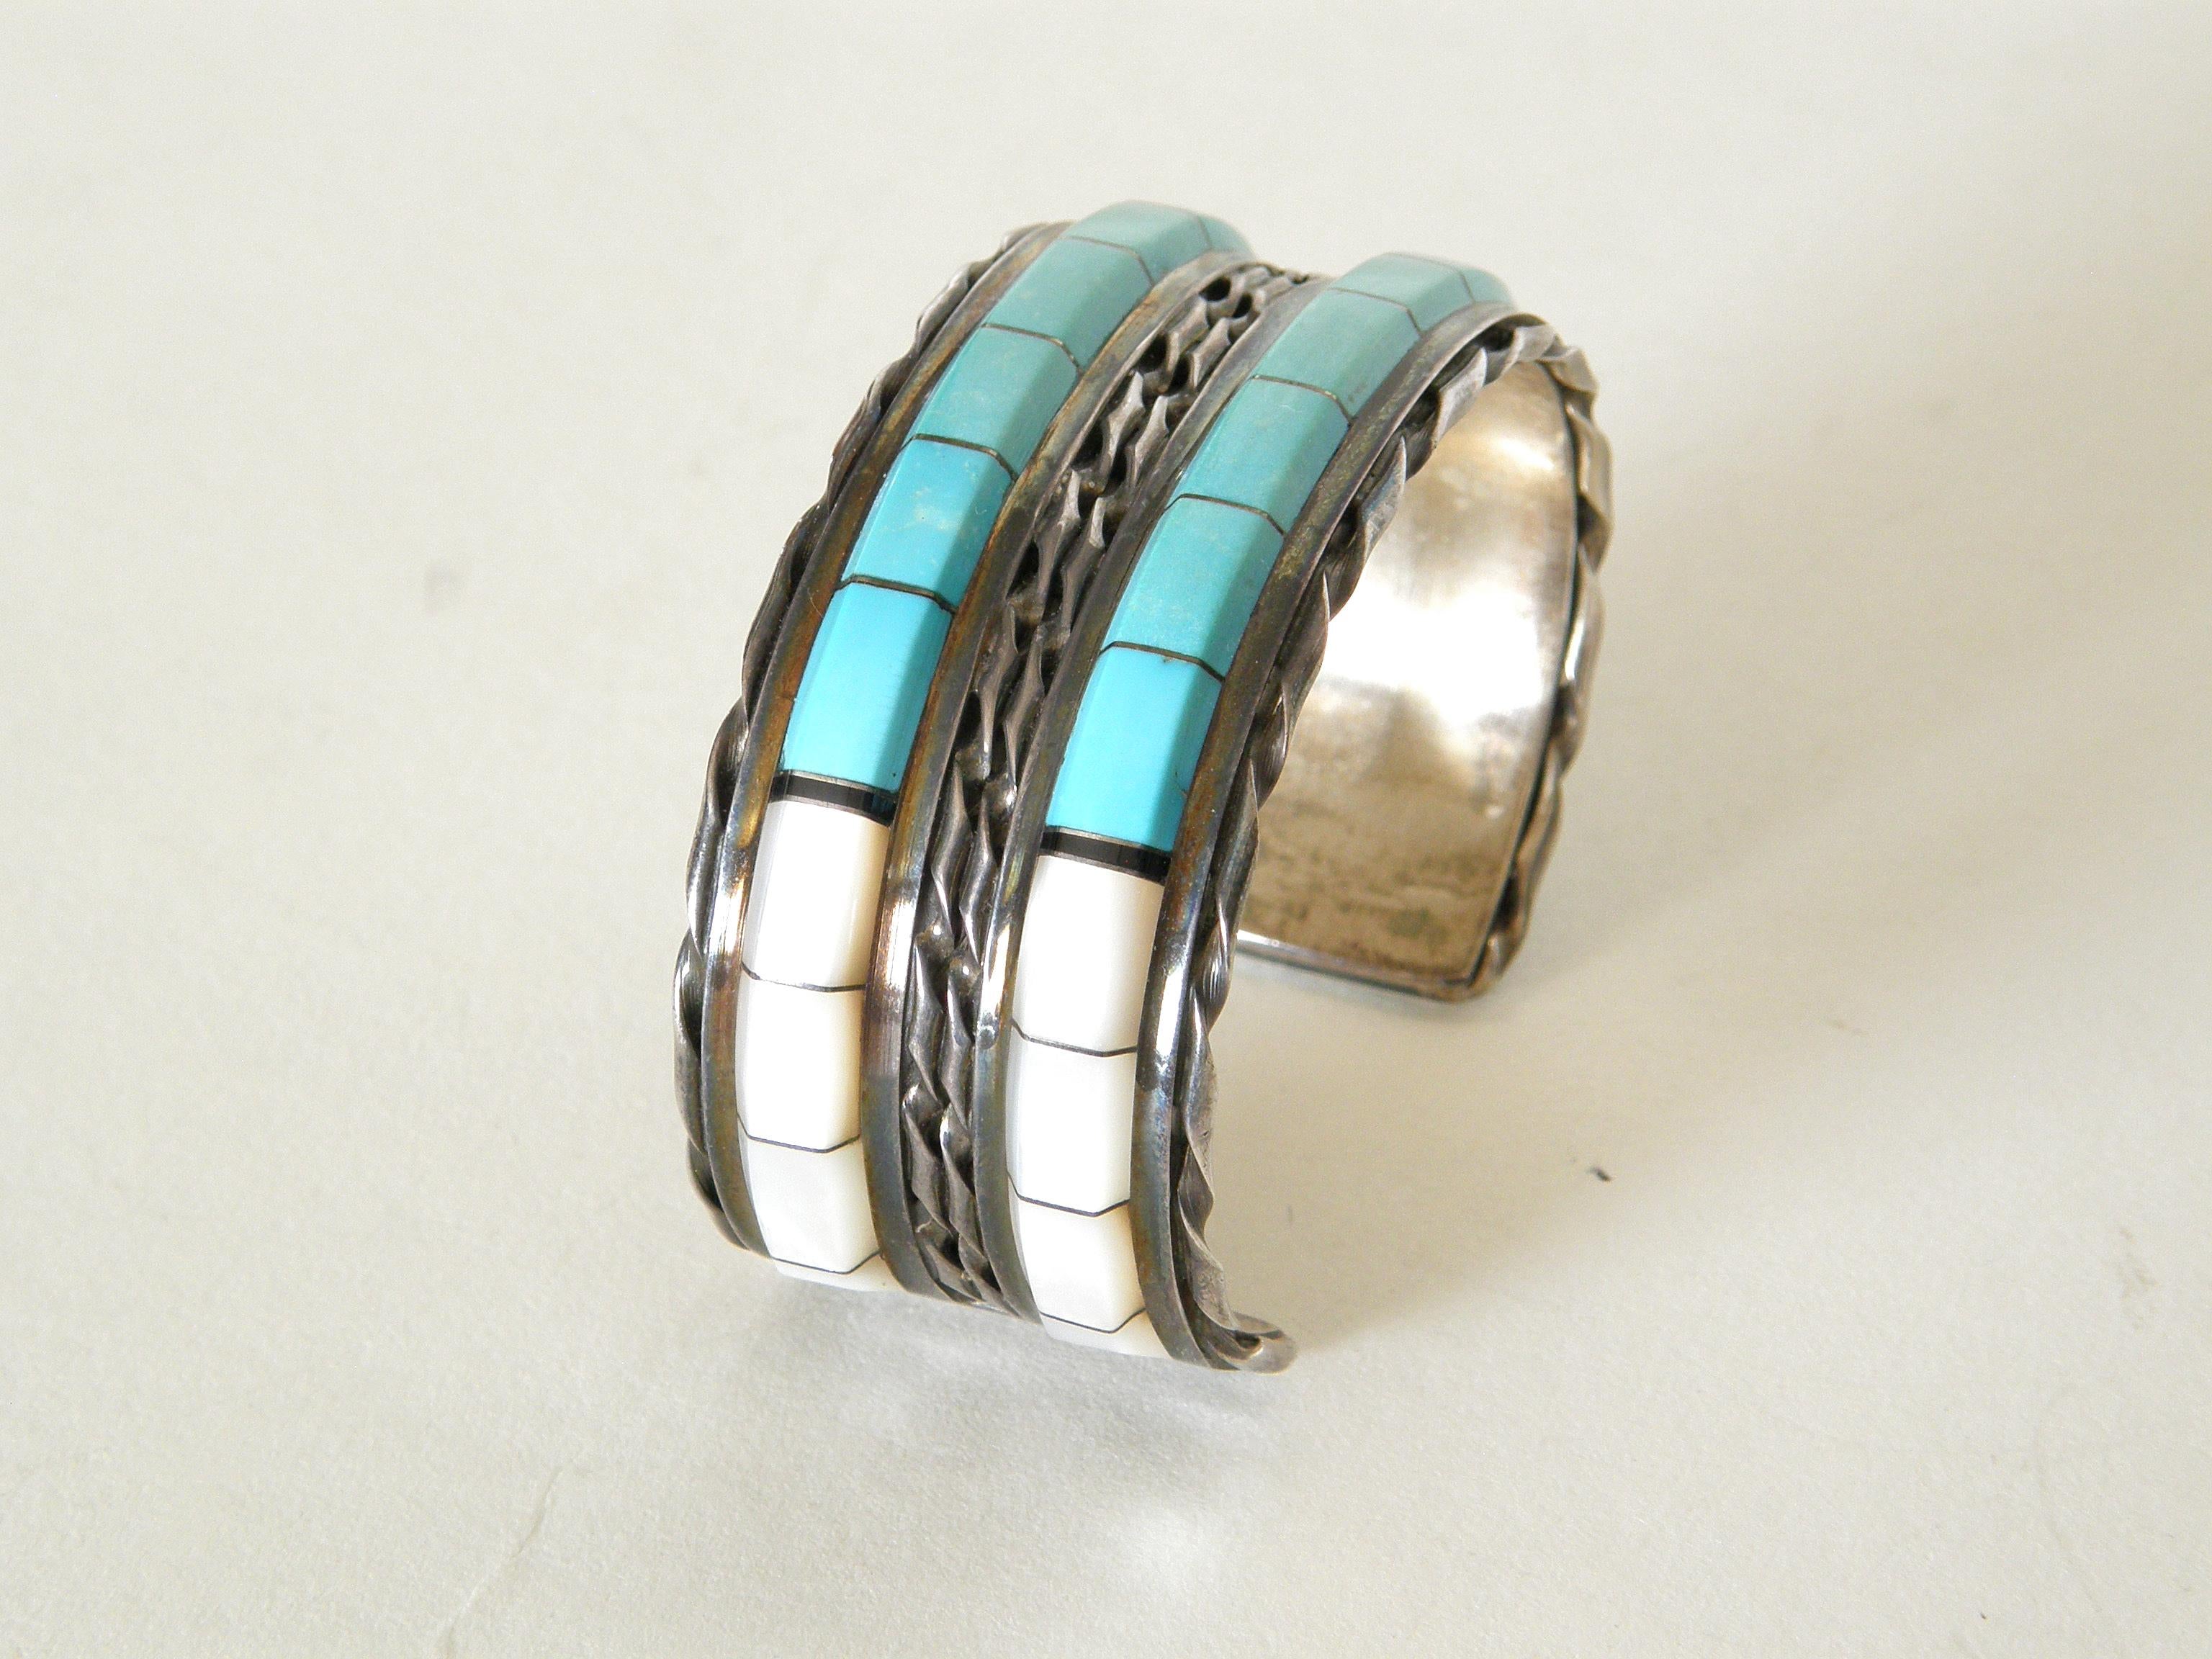 Native American Sterling Cuff Bracelet by Zuni Artists Martin and Esther Panteah